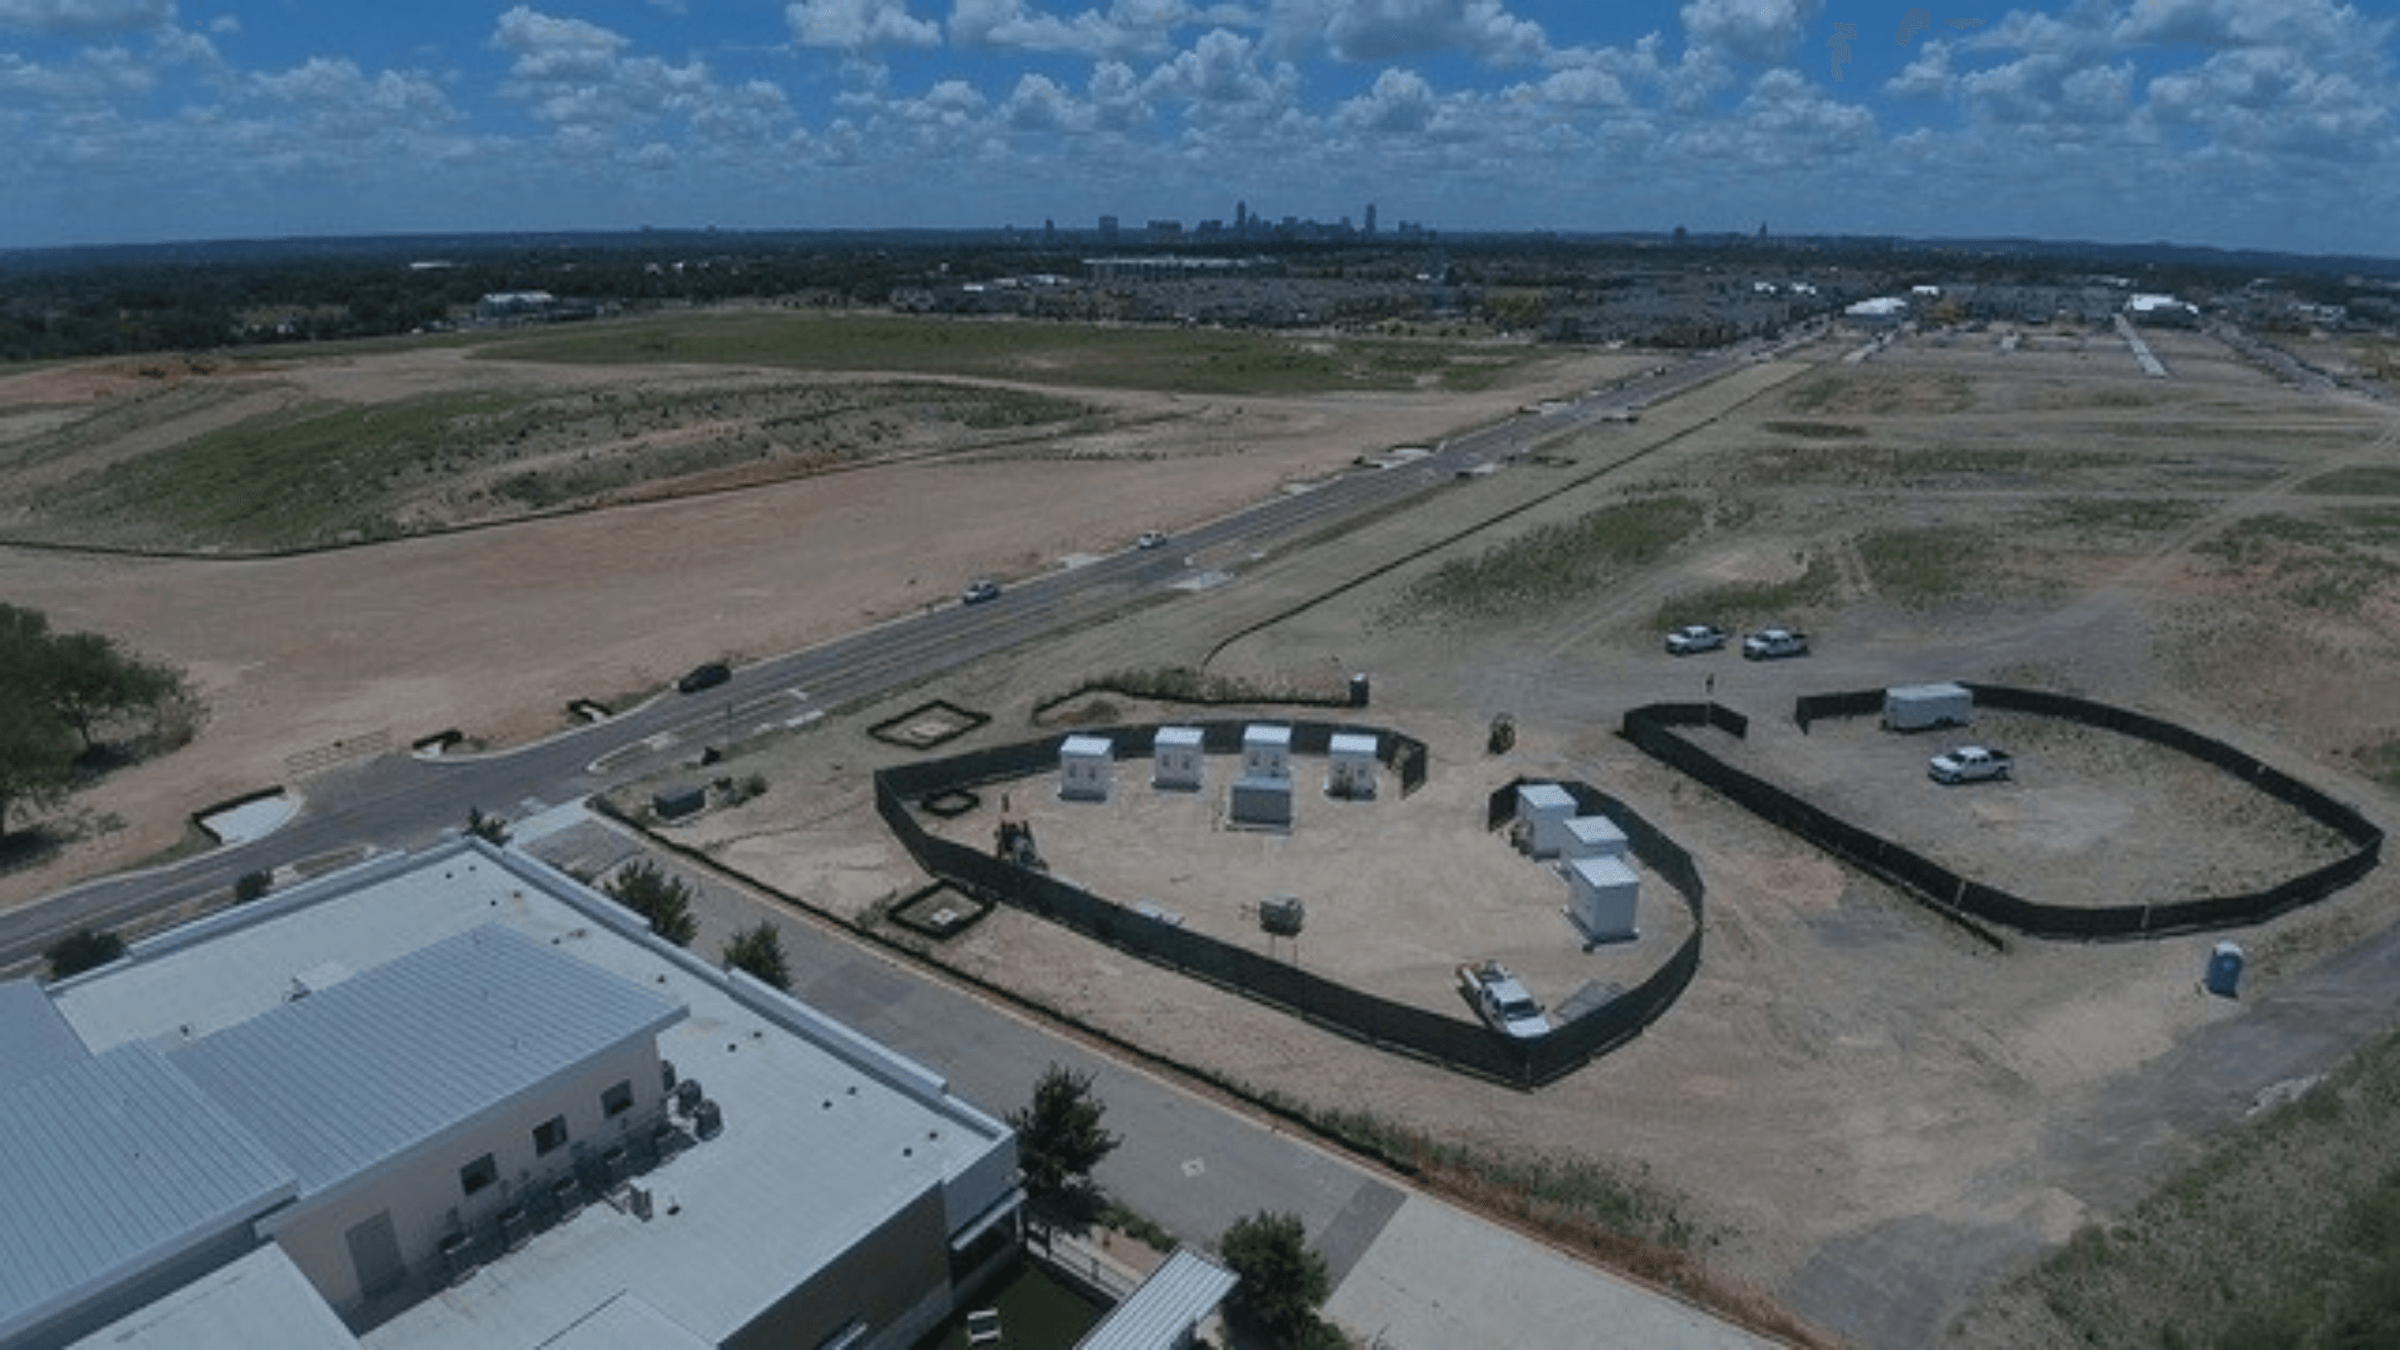 Overview of austin site